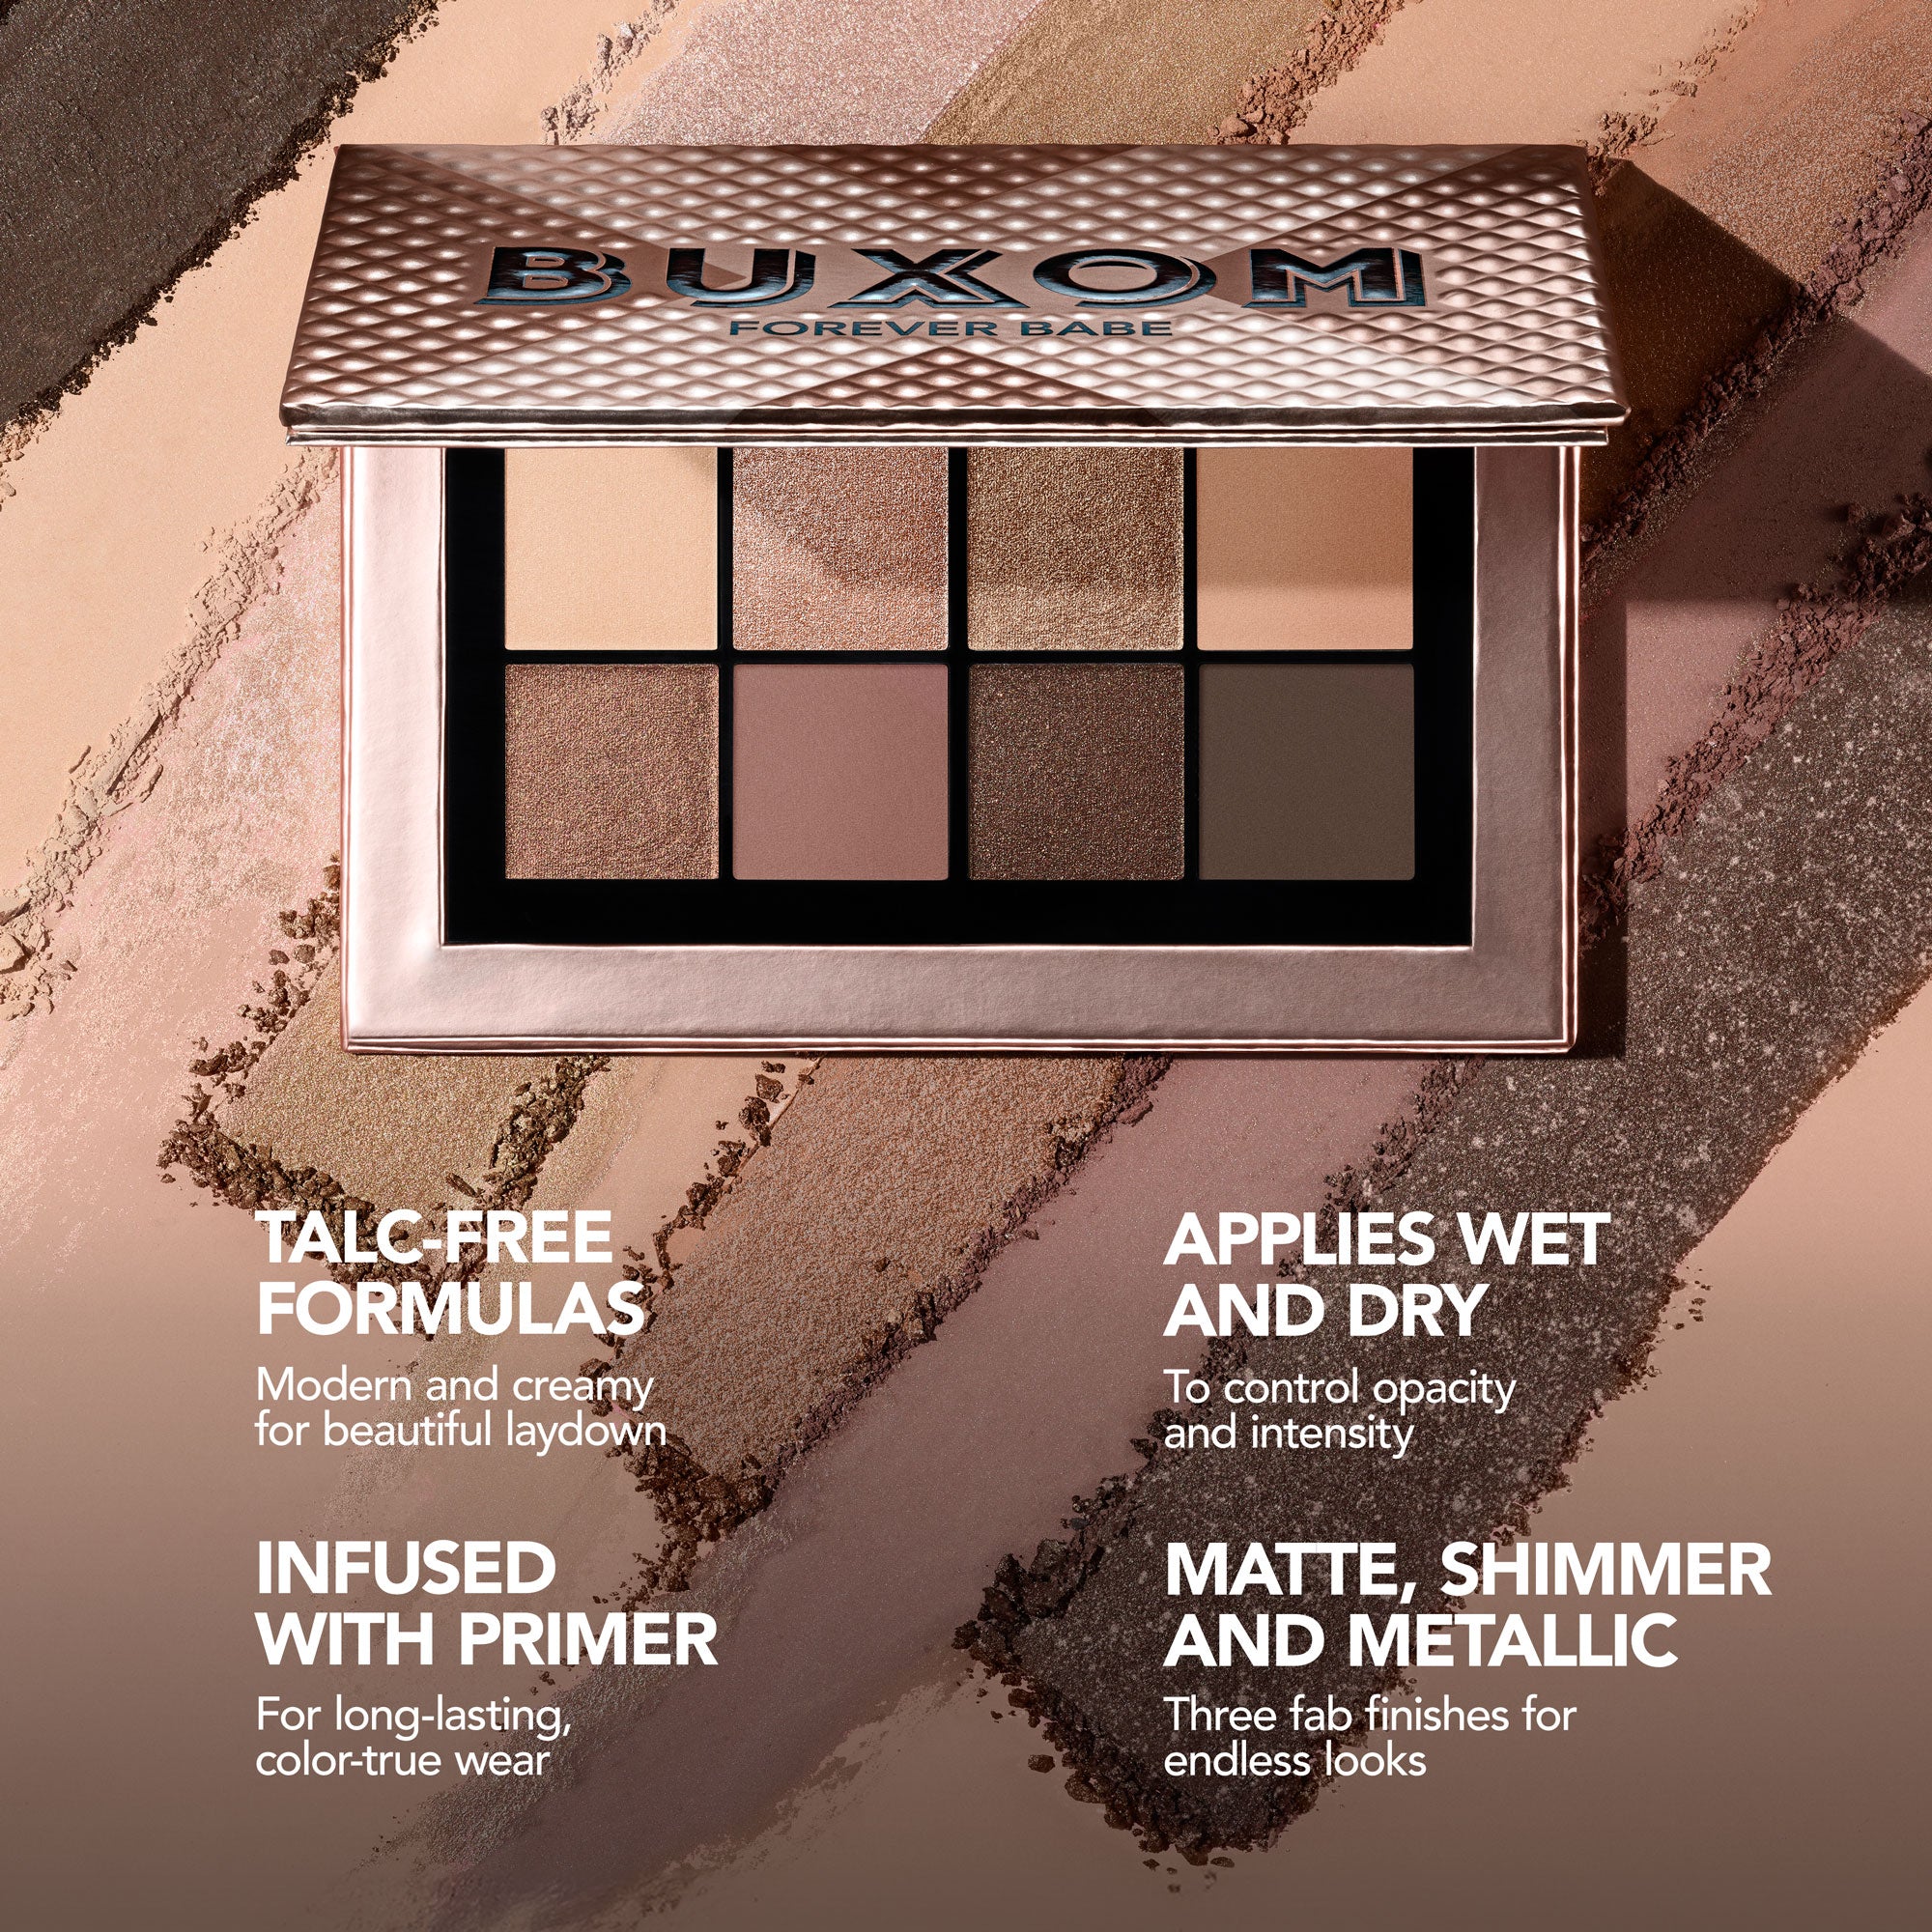 Forever Babe Iconic Nudes Eyeshadow Palette view 7